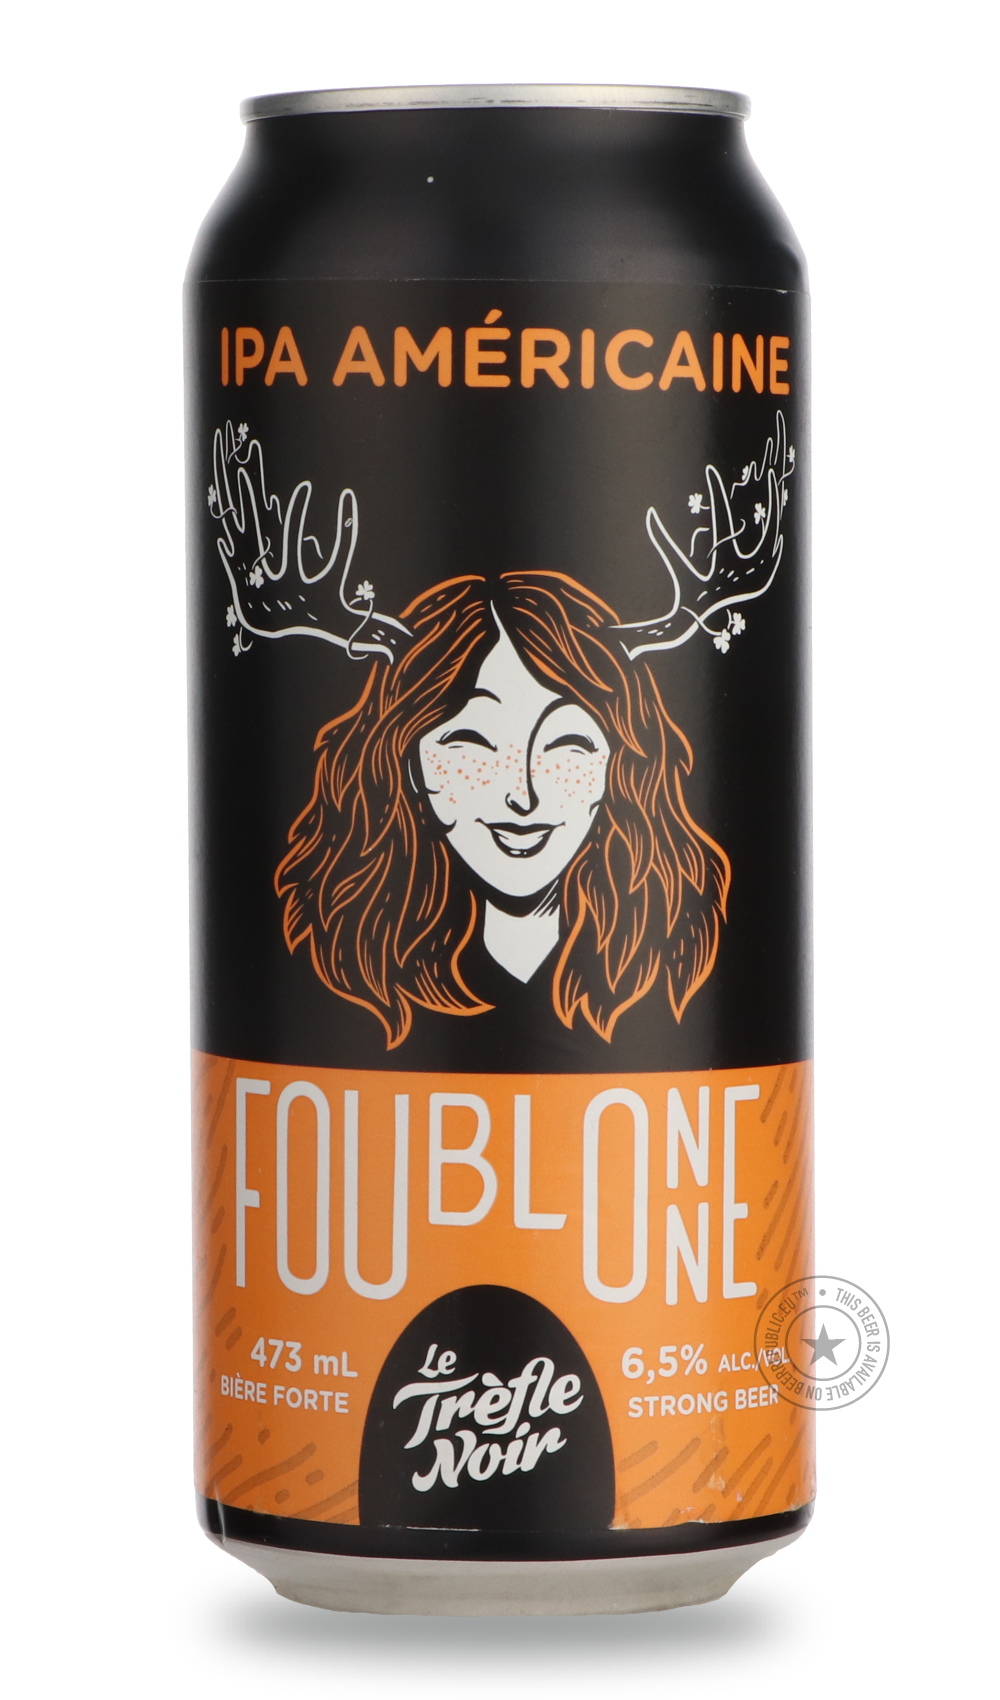 -Le Tréfle Noir- Foublonne-IPA- Only @ Beer Republic - The best online beer store for American & Canadian craft beer - Buy beer online from the USA and Canada - Bier online kopen - Amerikaans bier kopen - Craft beer store - Craft beer kopen - Amerikanisch bier kaufen - Bier online kaufen - Acheter biere online - IPA - Stout - Porter - New England IPA - Hazy IPA - Imperial Stout - Barrel Aged - Barrel Aged Imperial Stout - Brown - Dark beer - Blond - Blonde - Pilsner - Lager - Wheat - Weizen - Amber - Barley